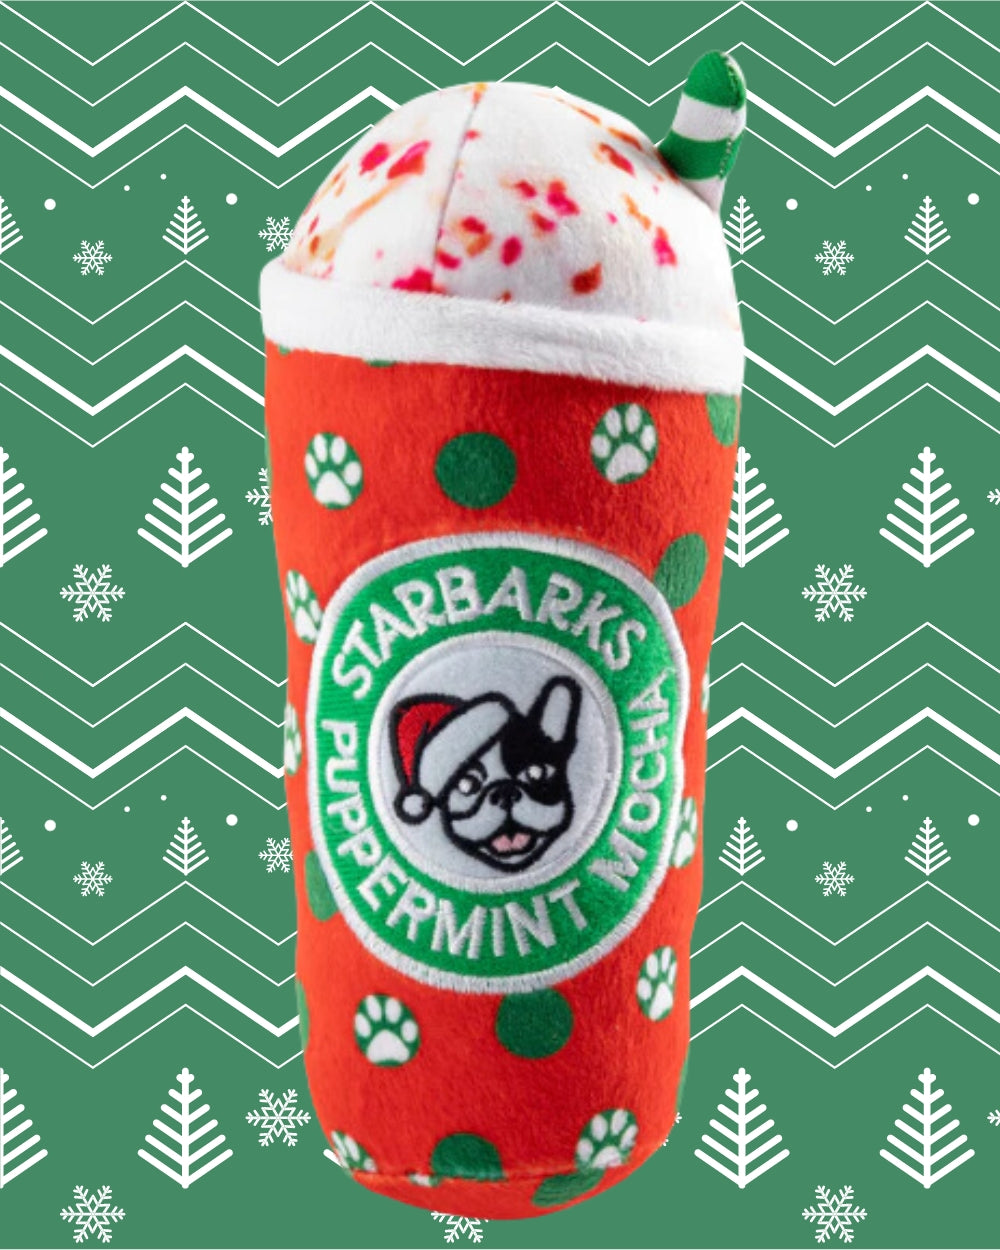 Starbarks Puppermint Mocha - Holiday Dots Cup Squeaker Plush Dog Toy Haute Diggity Dog